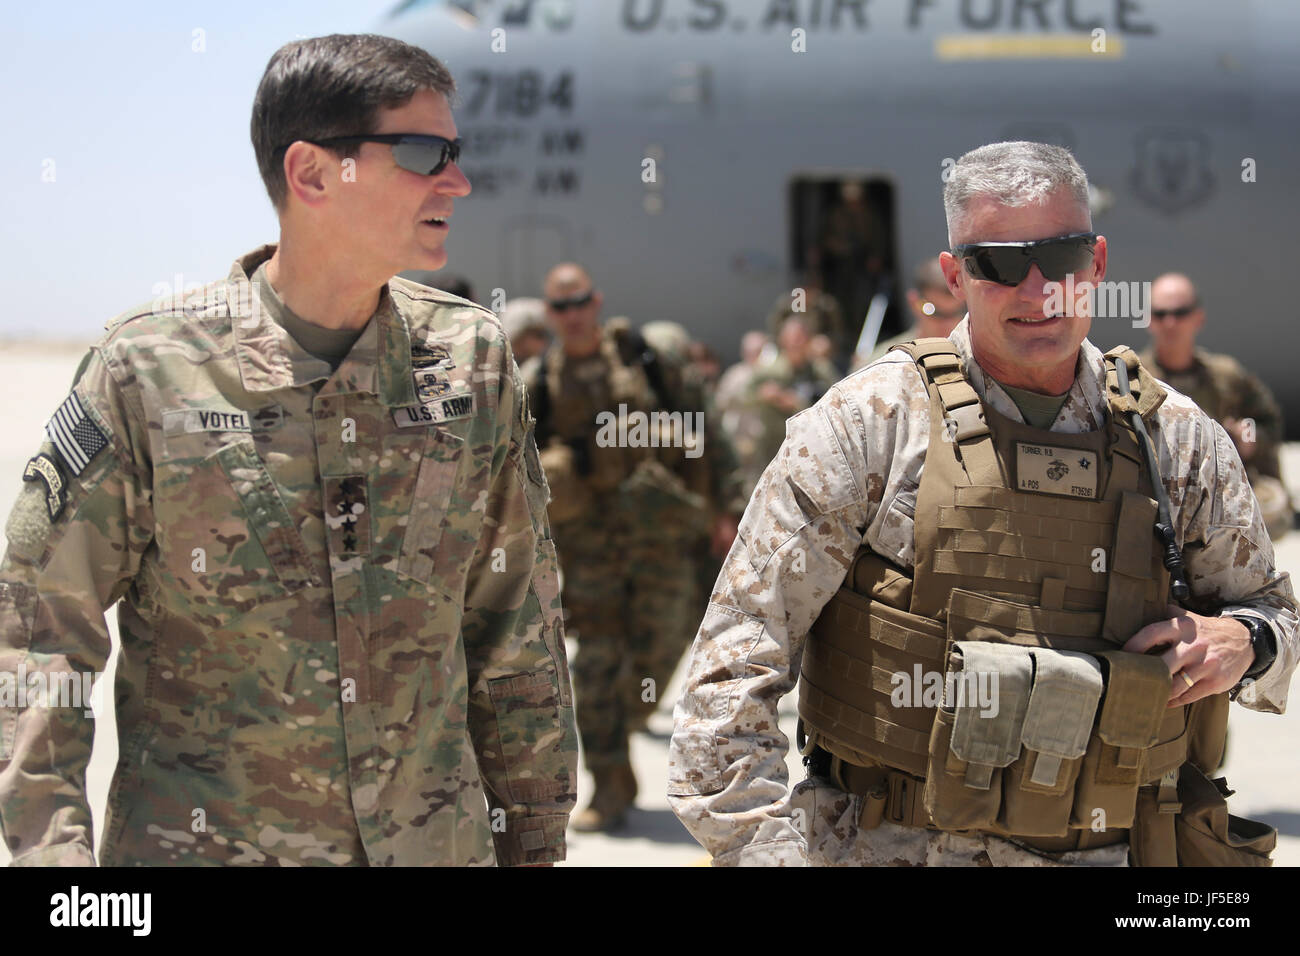 Army Gen. Joseph Votel, left, the commanding general of U.S. Central Command, speaks with Marine Brig. Gen. Roger Turner, right, the commanding general of Task Force Southwest, at Camp Bastion, Afghanistan, June 2, 2017. Votel had an opportunity to speak with the Marines and Sailors of the Task Force, helping gauge the recent progress and current challenges as the unit continues to train, advise and assist the Afghan National Army 215th Corps and 505th Zone National Police. (U.S. Marine Corps photo by Sgt. Lucas Hopkins) Stock Photo